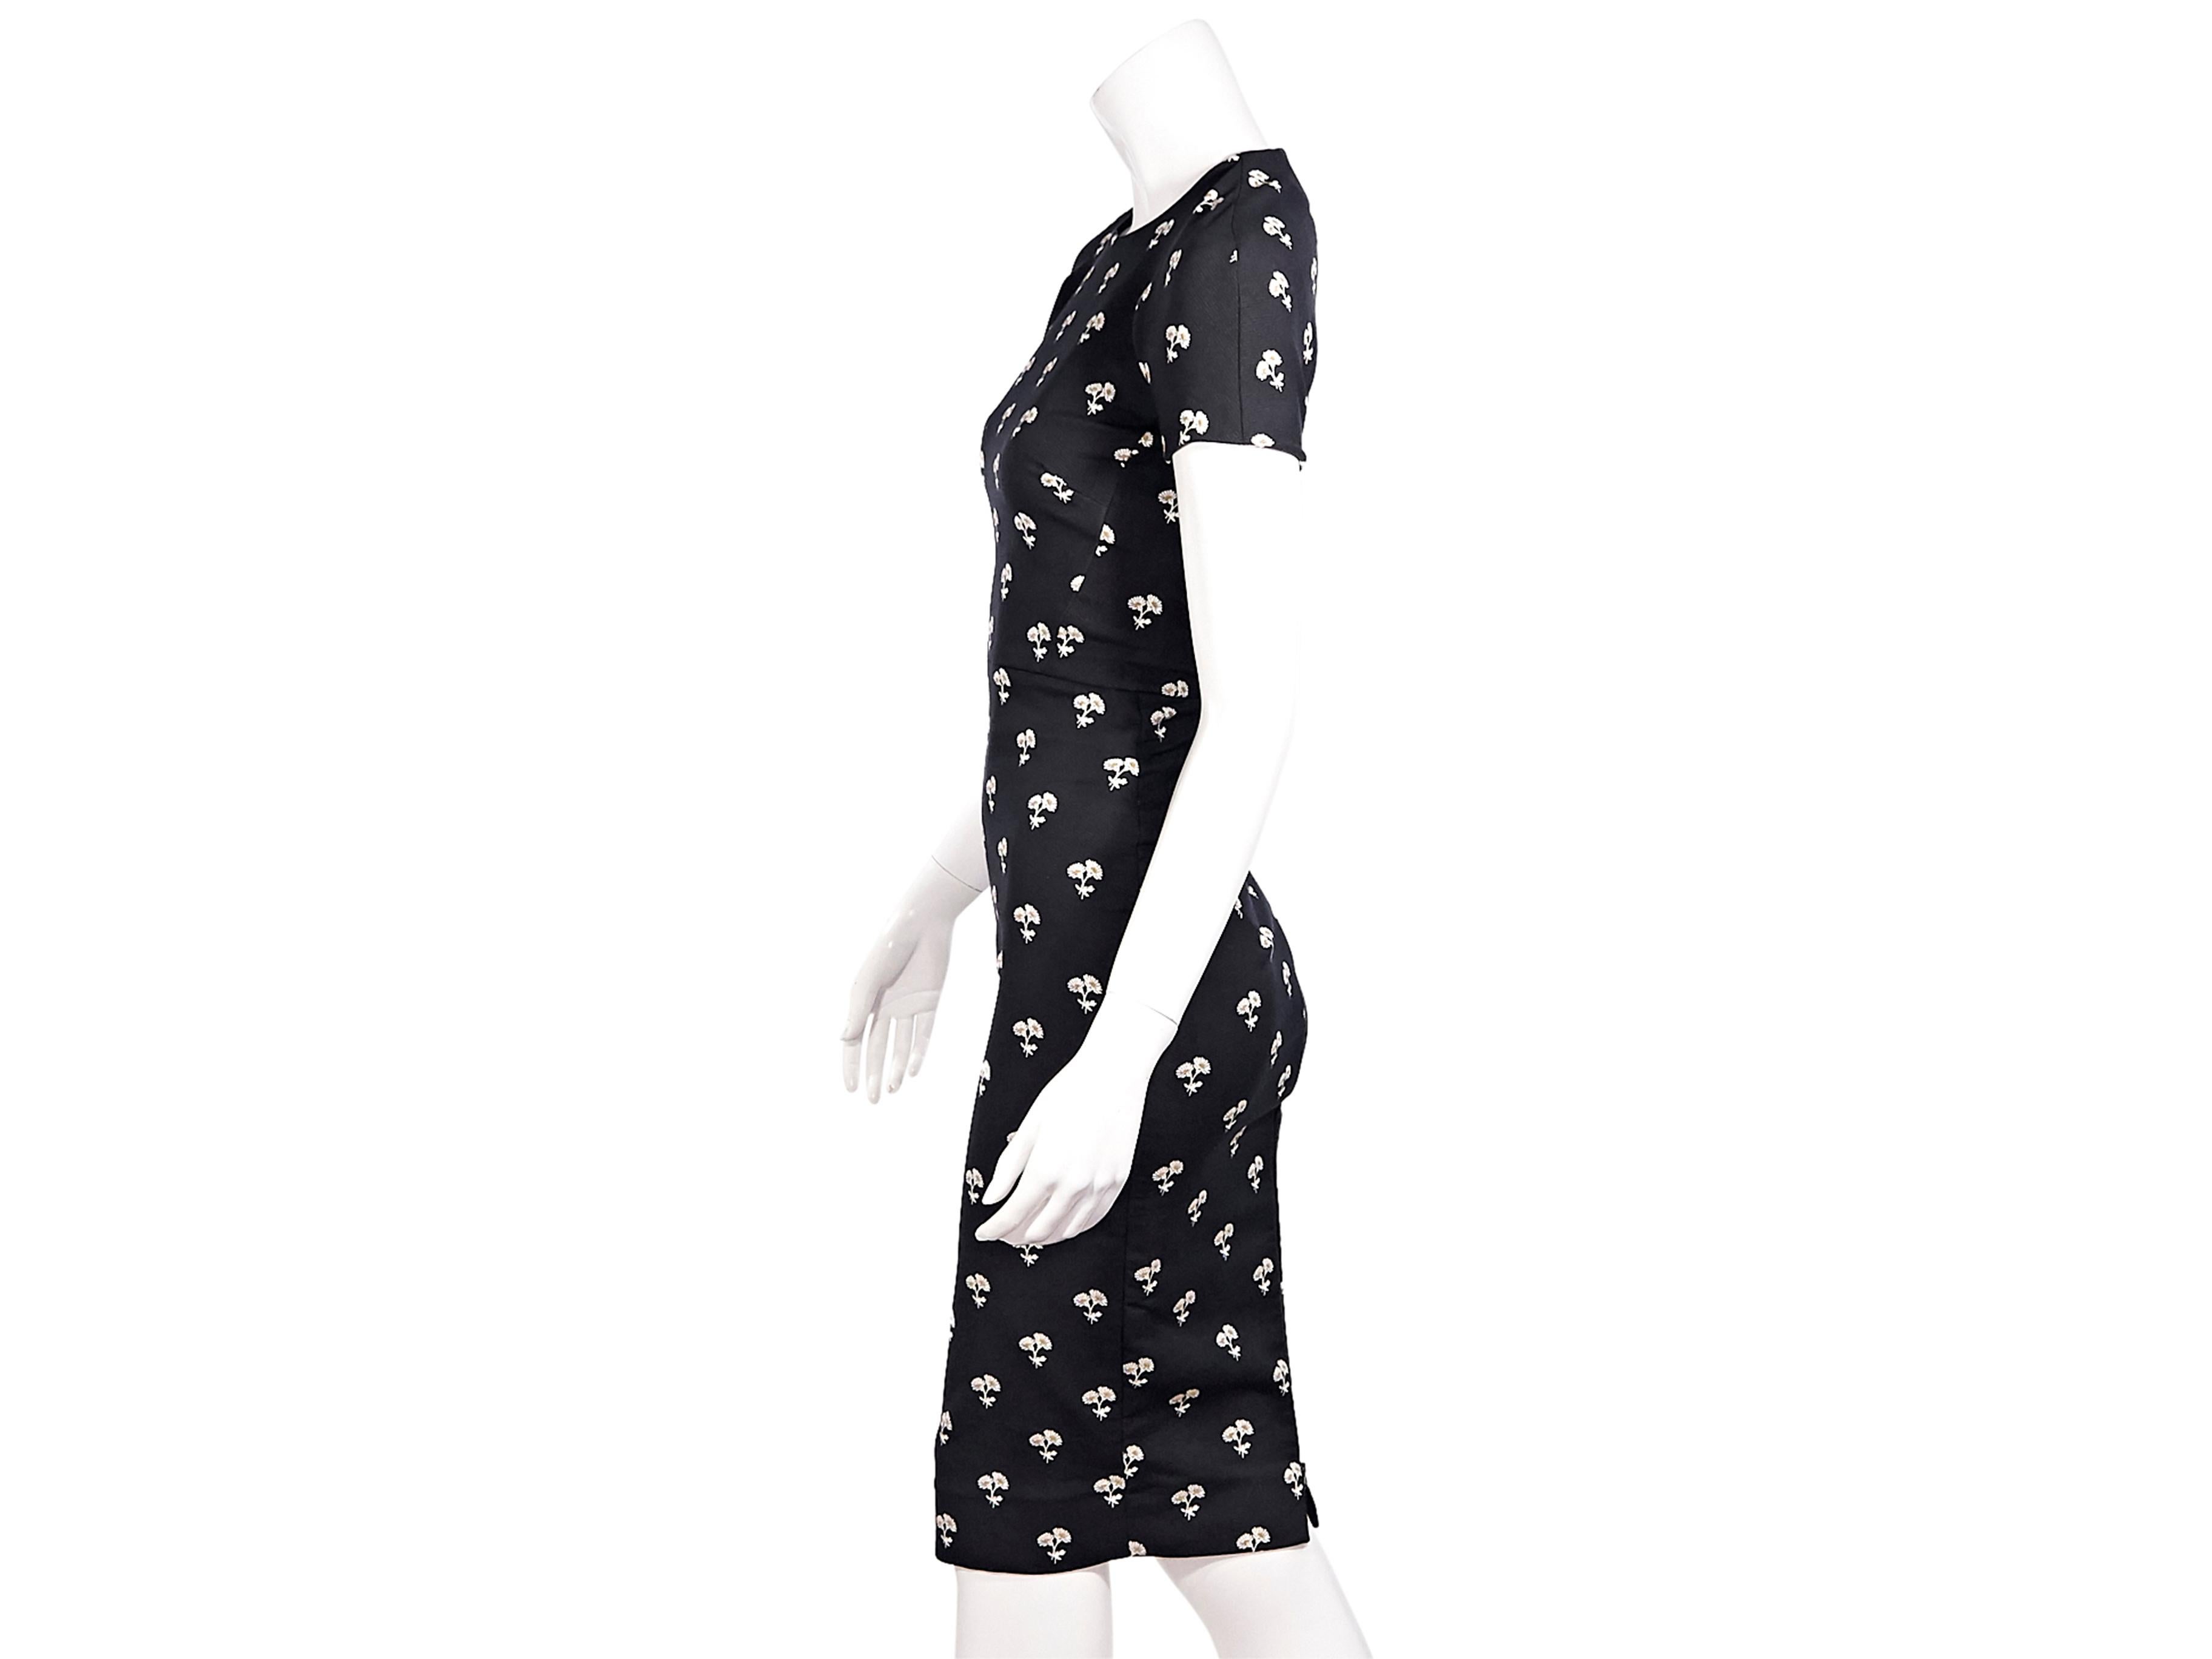 Product details:  Black and white dandelion-embroidered sheath midi dress by Victoria Beckham.  Stretch cotton-blend fabrication.  Crewneck.  Short sleeves.  Exposed back zip closure.  Center back hem vent.  32